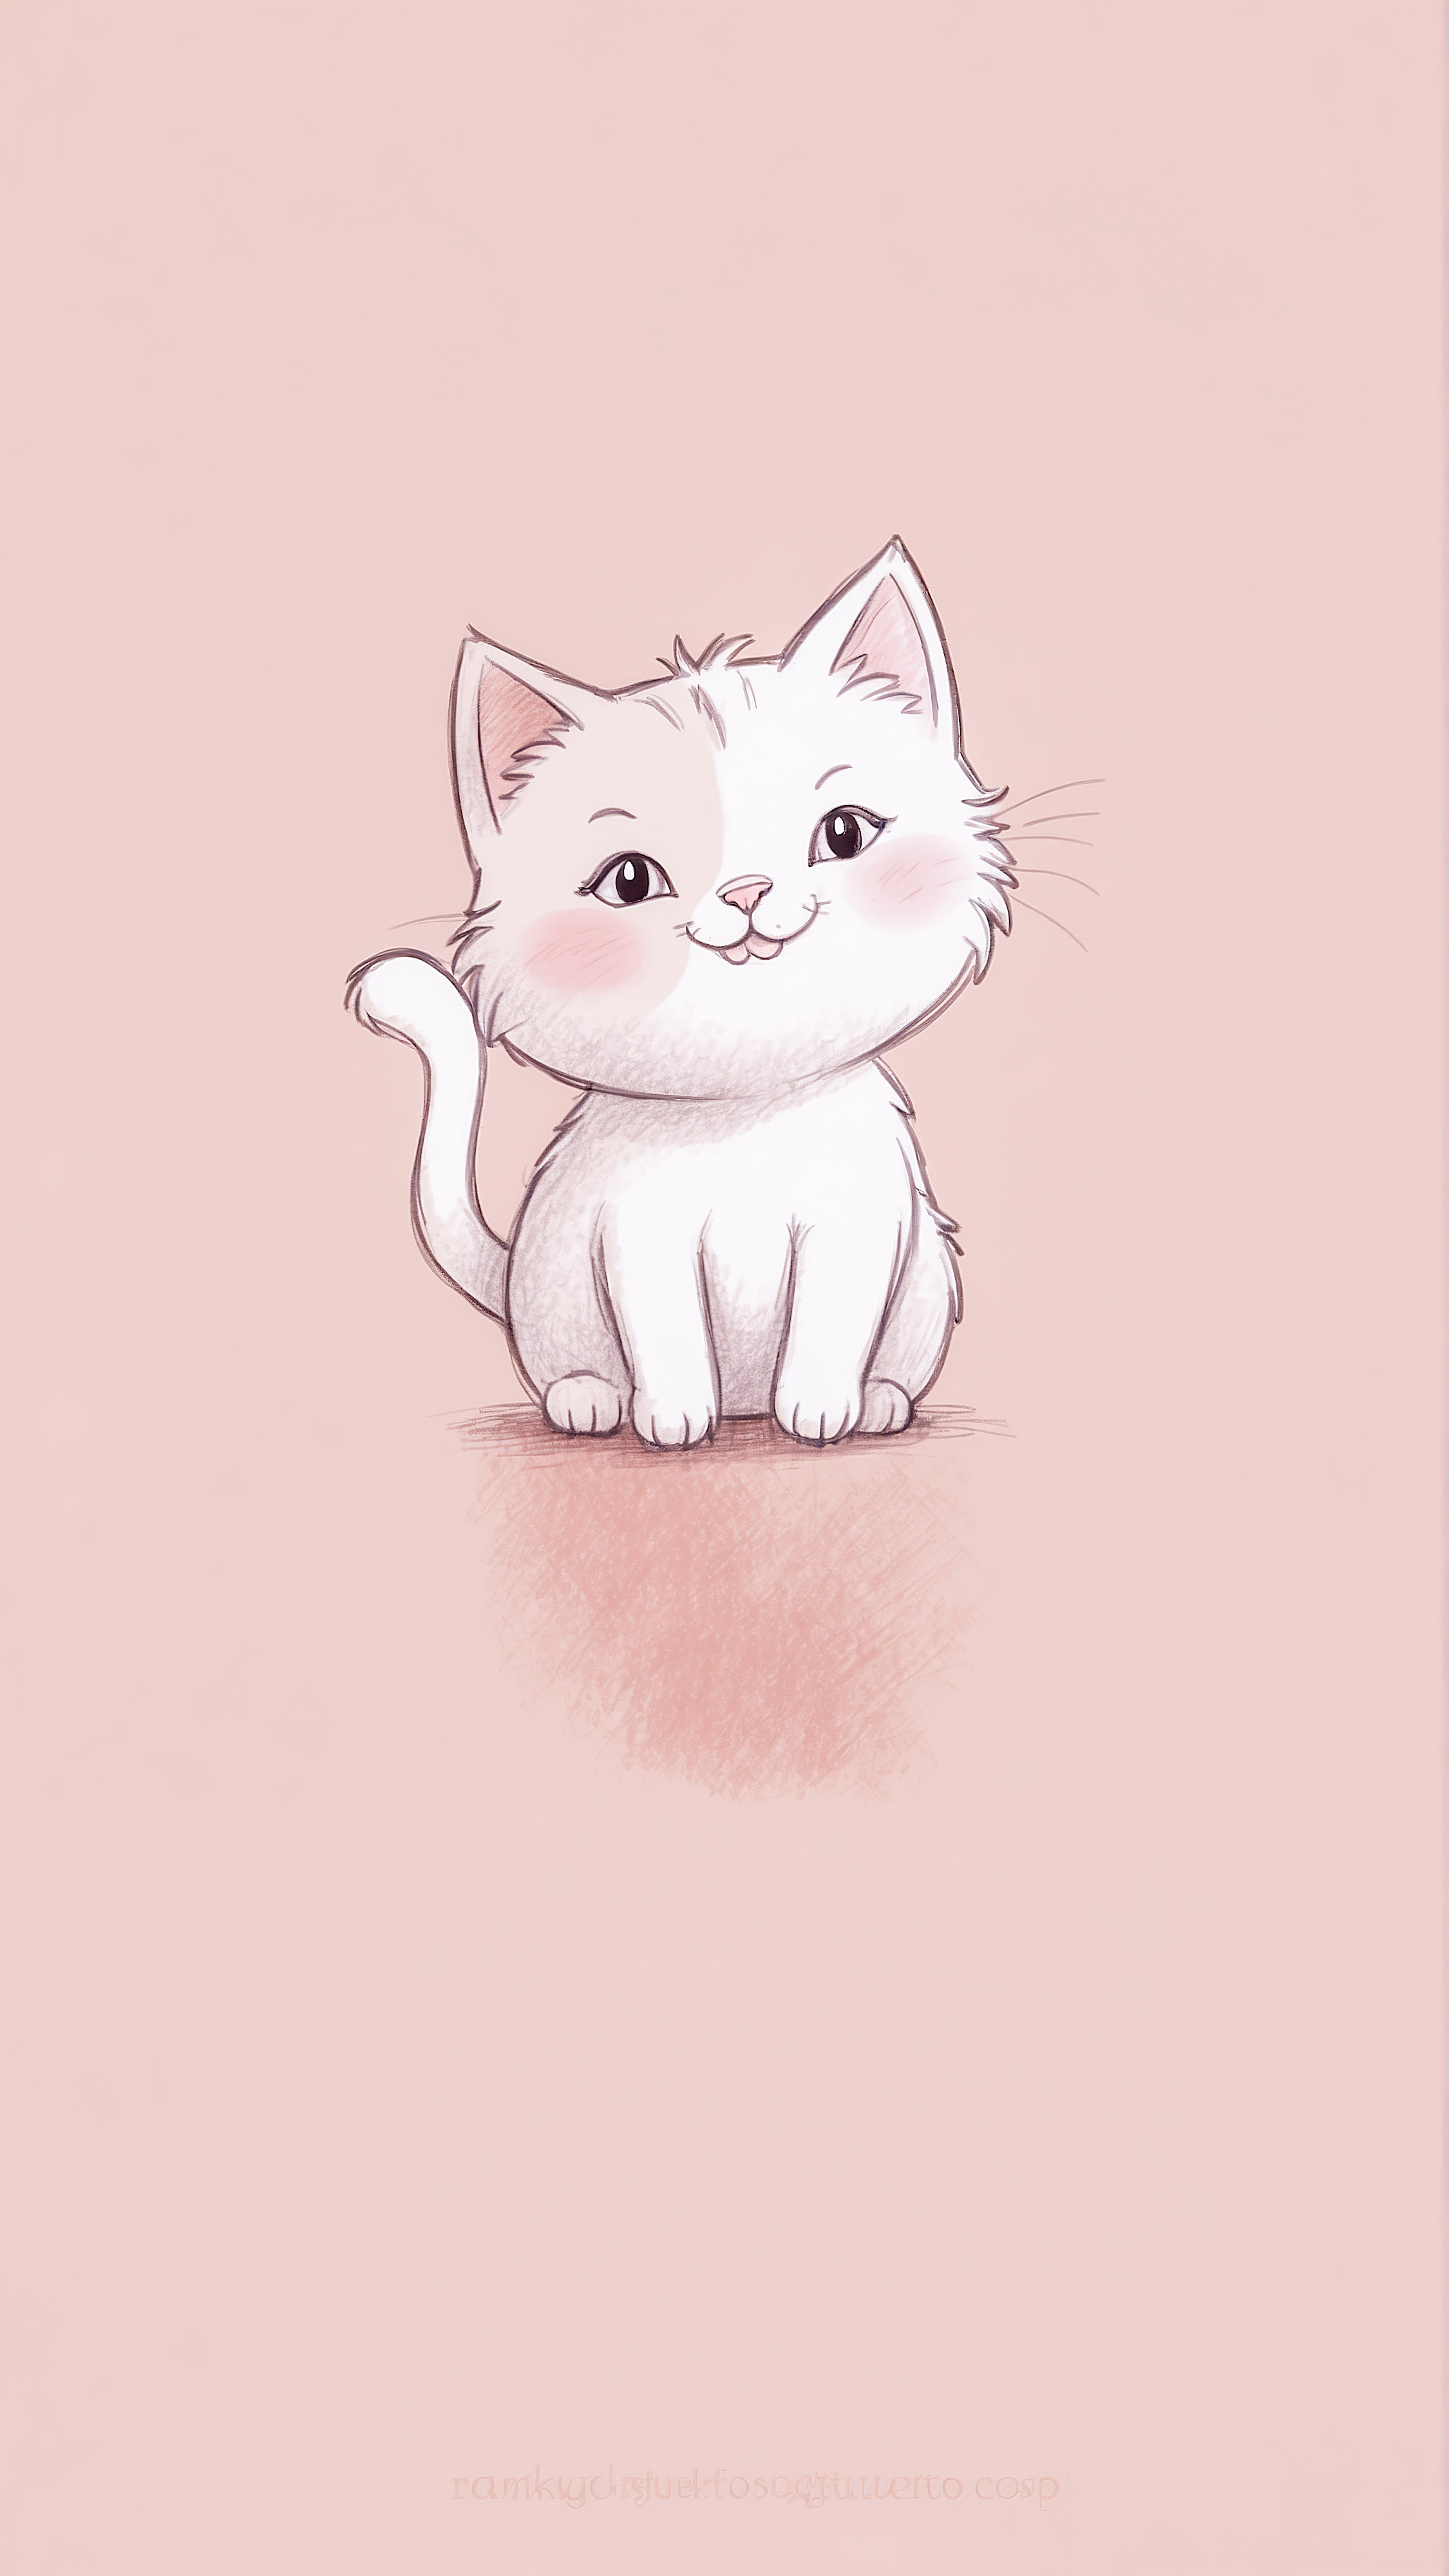 Capture the essence of simplicity with our nice wallpaper for iPhone, featuring a cute smiling cat on a beige background.